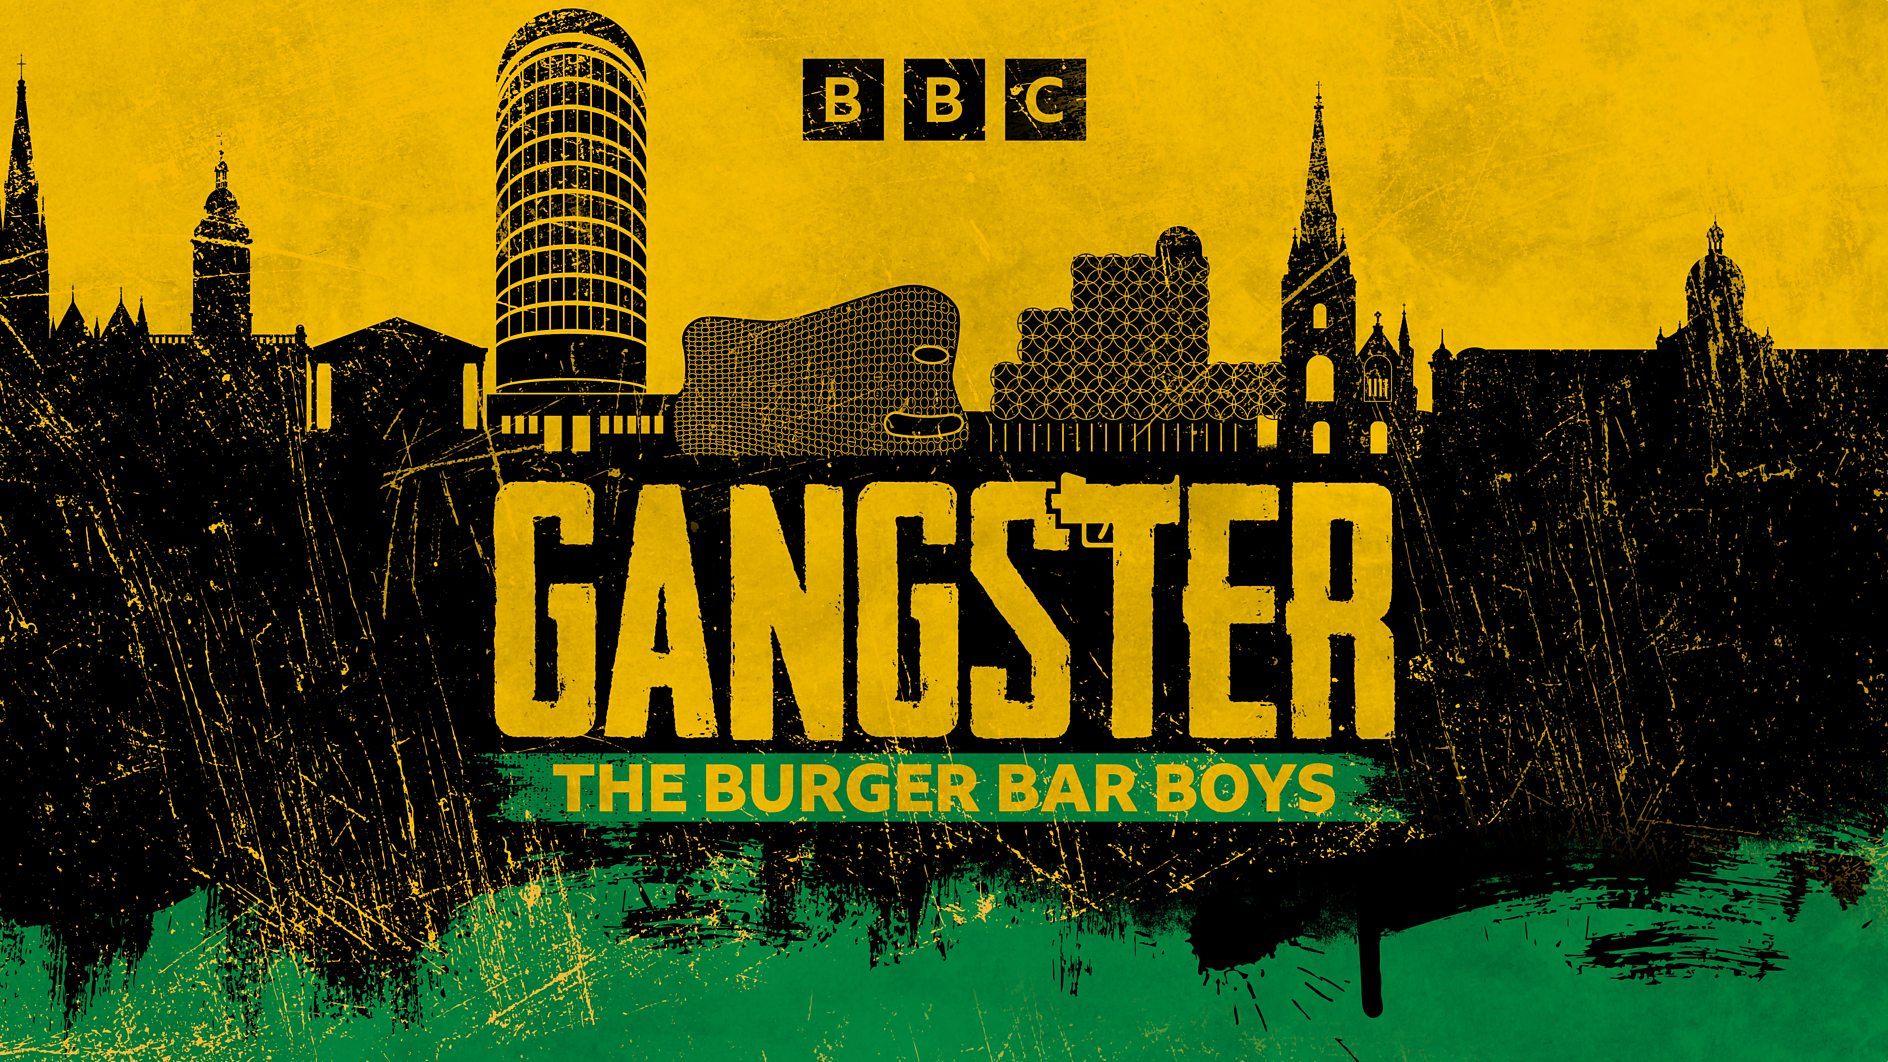 New BBC 5 Live podcast unravels the story of the Burger Bar Boys